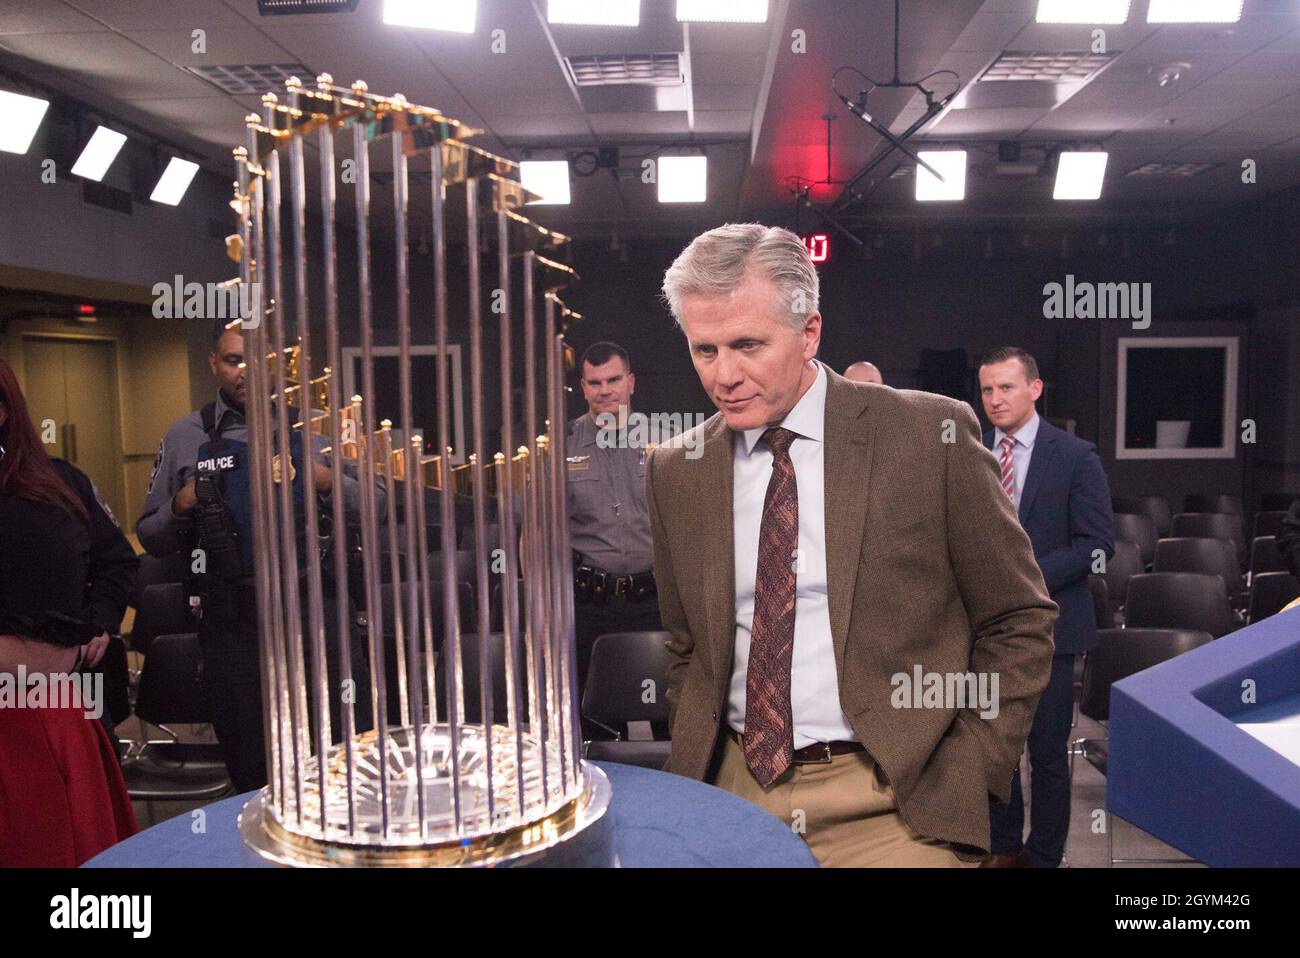 Principal Deputy Assistant to the Secretary of Defense for Public Affairs Charles E. Summers Jr. examines the Washington Nationals' 2019-2020 World Series Cup, at the Pentagon, Washington, D.C., Jan. 27, 2020. (DoD photo by Navy Petty Officer 2nd Class James K. Lee) Stock Photo